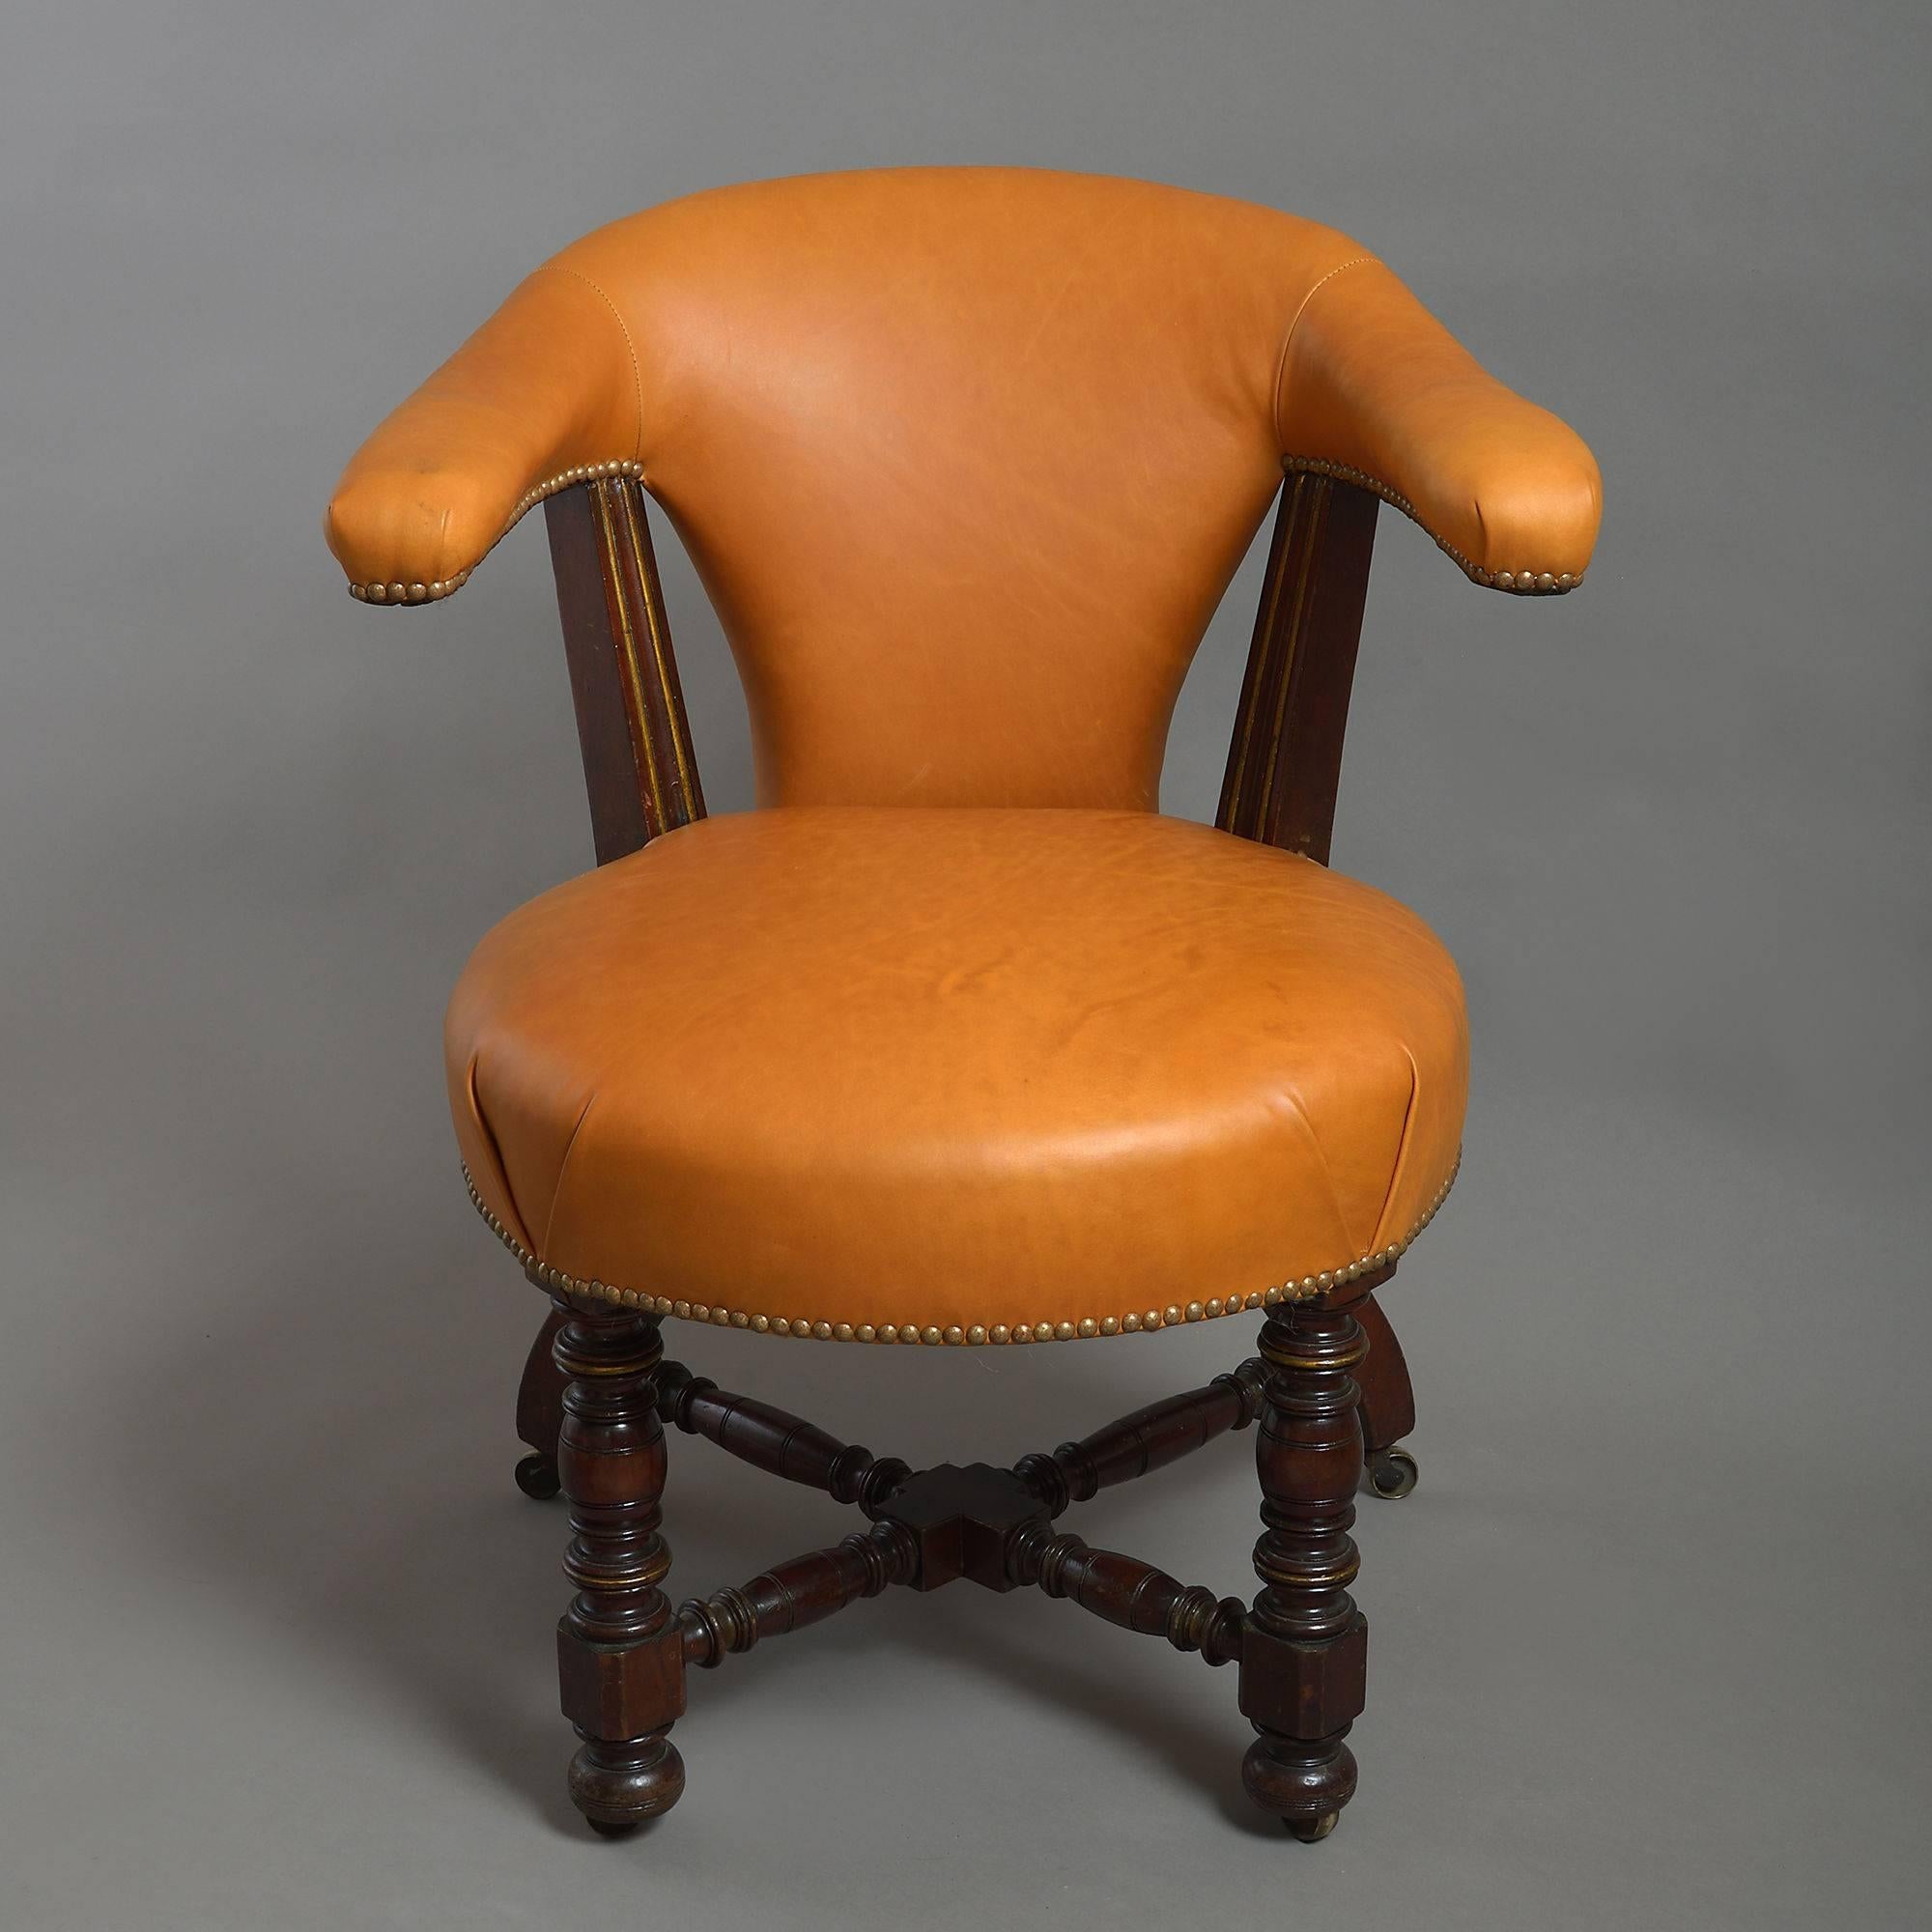 A late 19th century Victorian period mahogany and parcel gilded reading armchair, the back, arms and seat all upholstered in tan leather with patinated brass studding, the whole raised upon turned legs conjoined with an X-form stretcher and